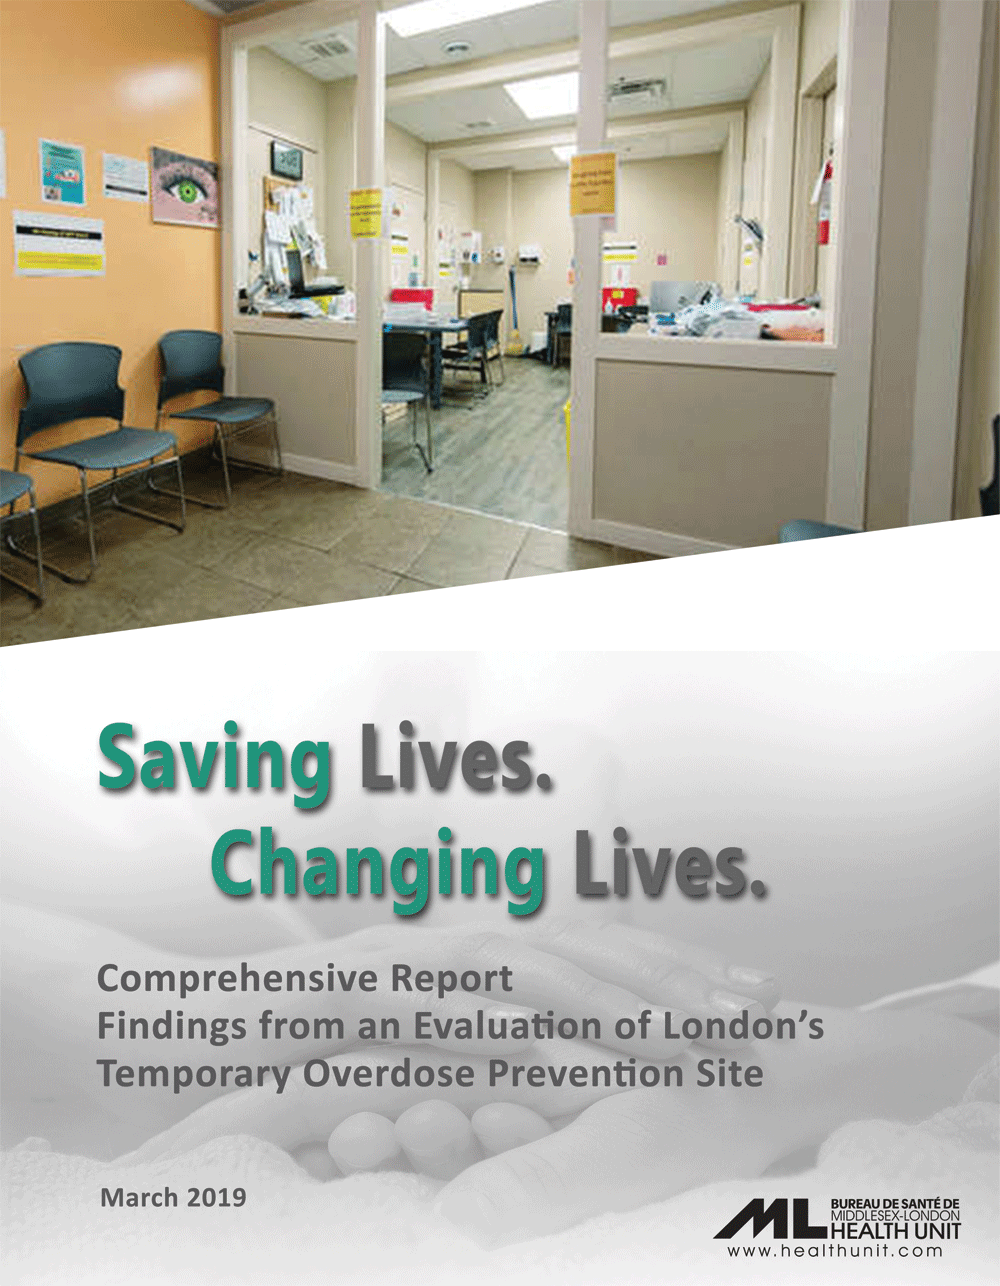 Saving Lives. Changing Lives. Findings from an Evaluation of London's Temporary Overdose Prevention Site